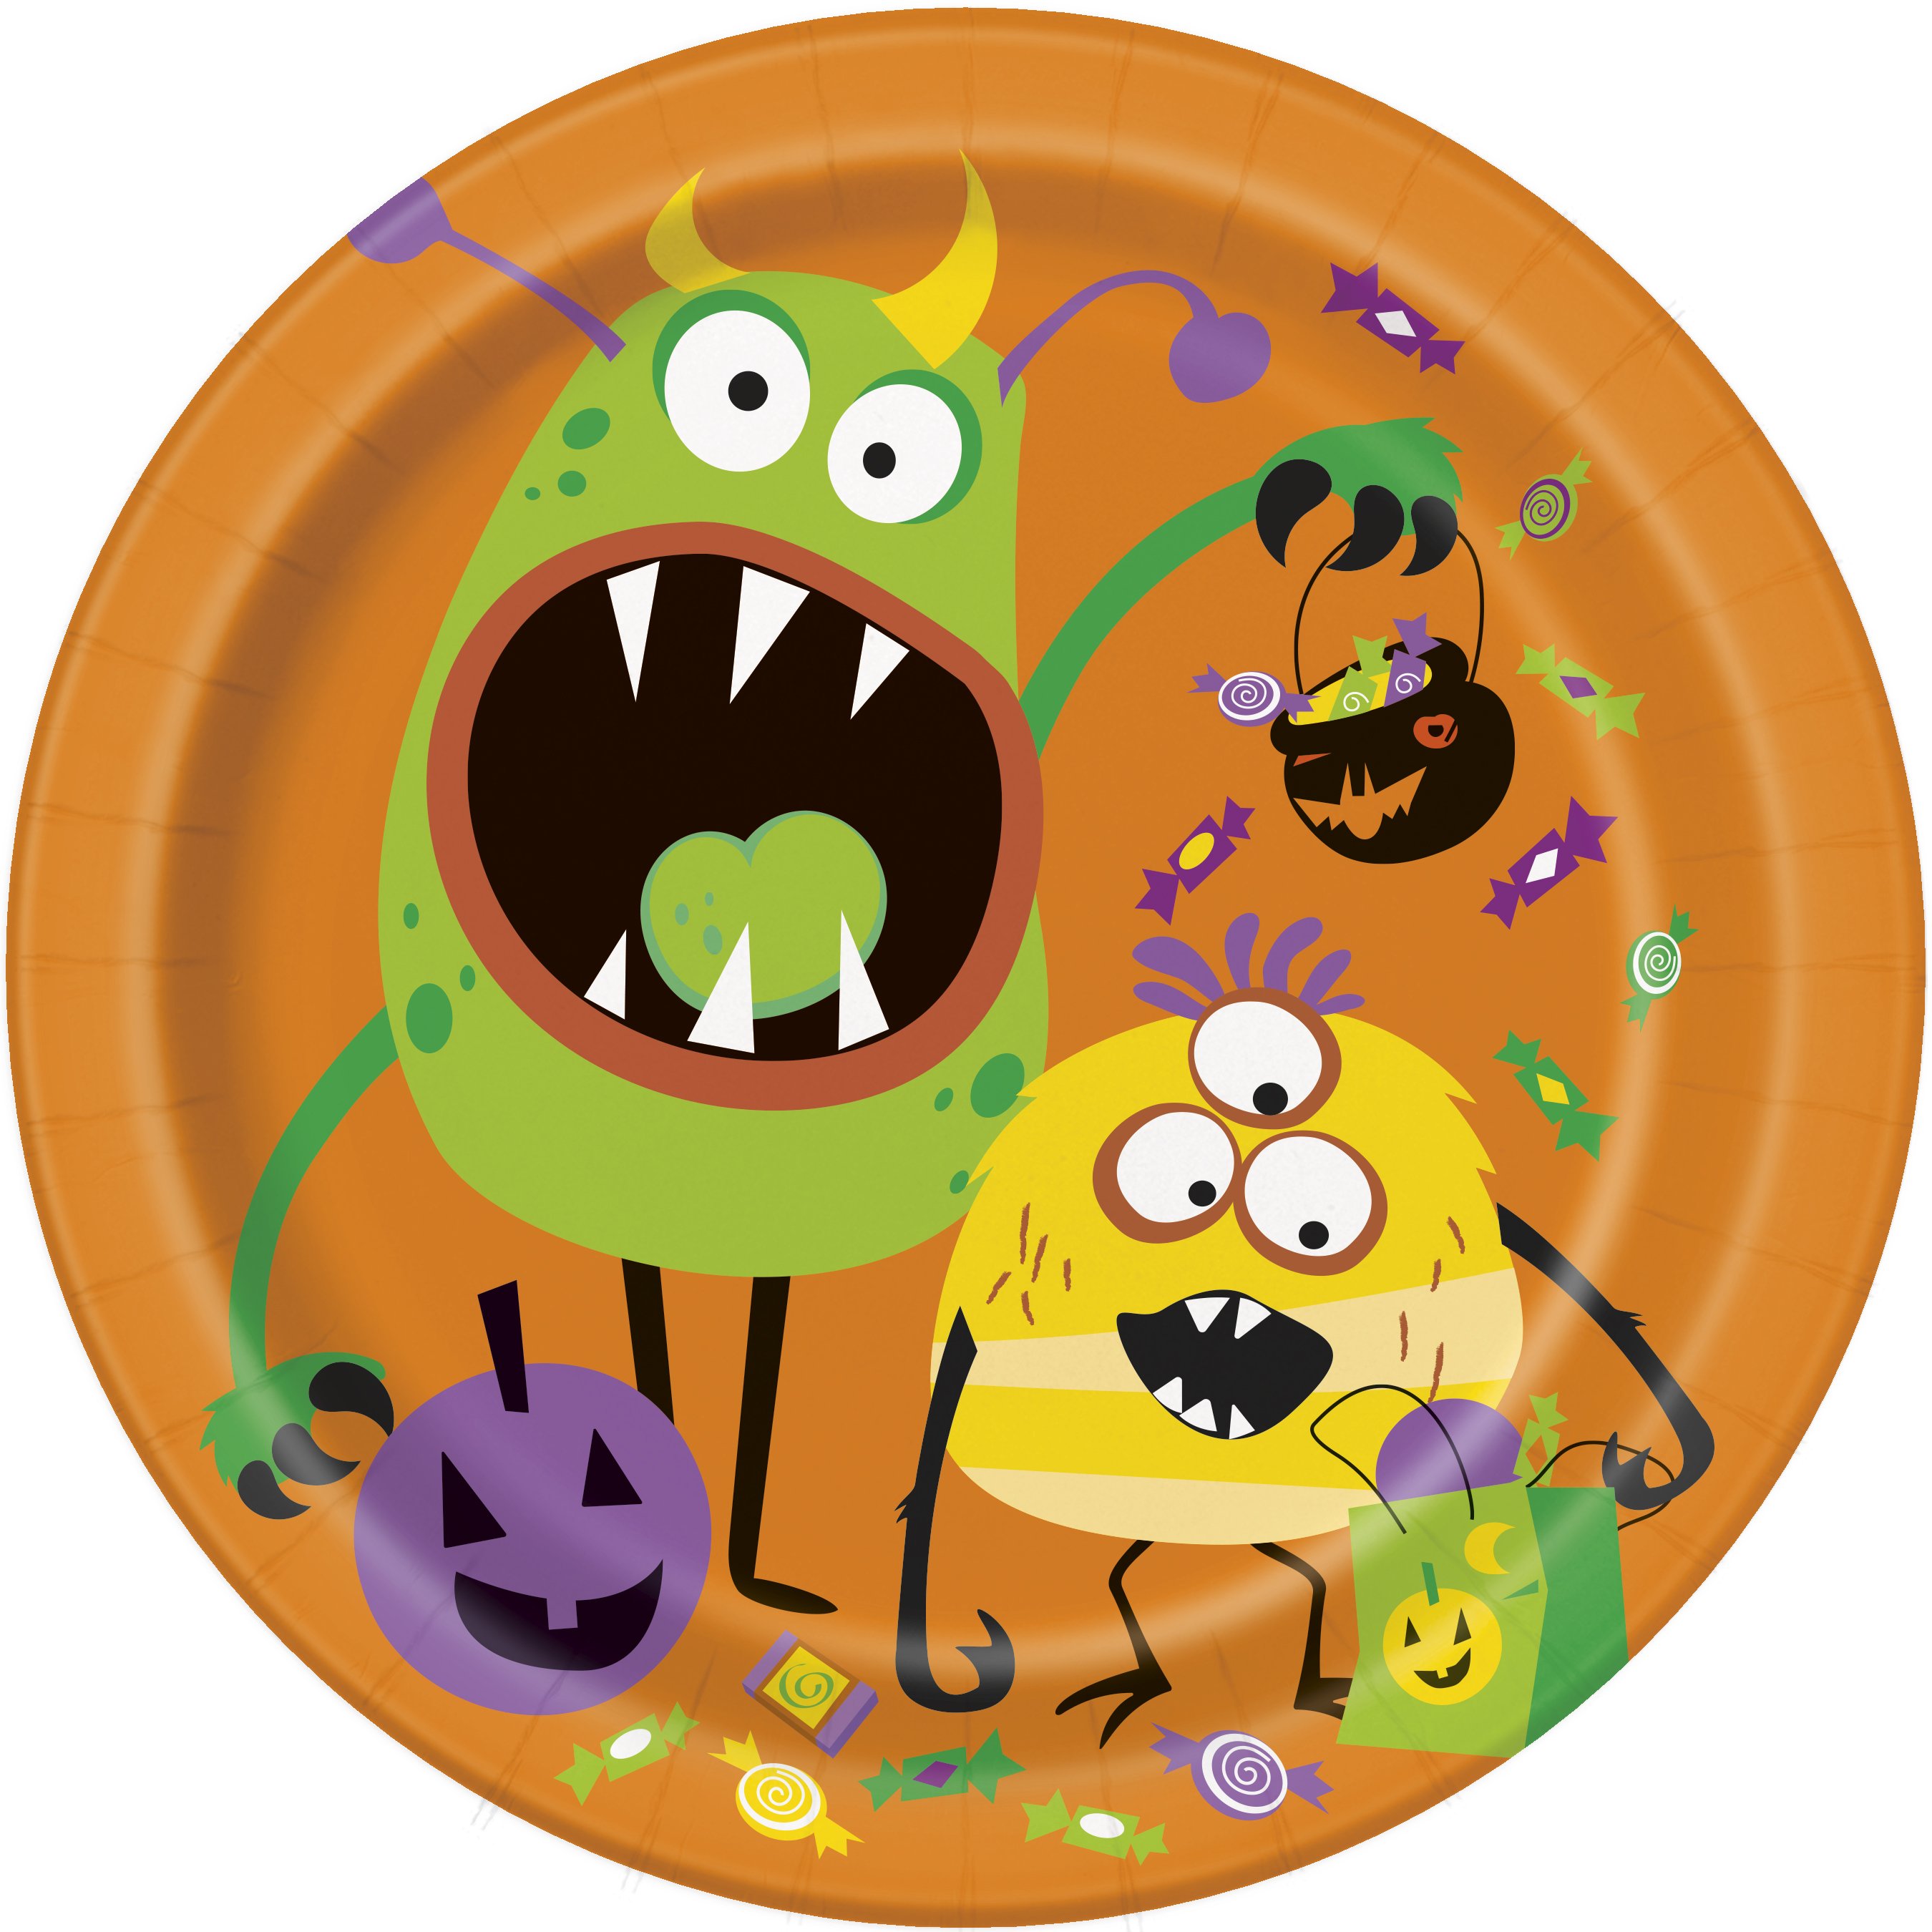 8 Silly Monsters Plates